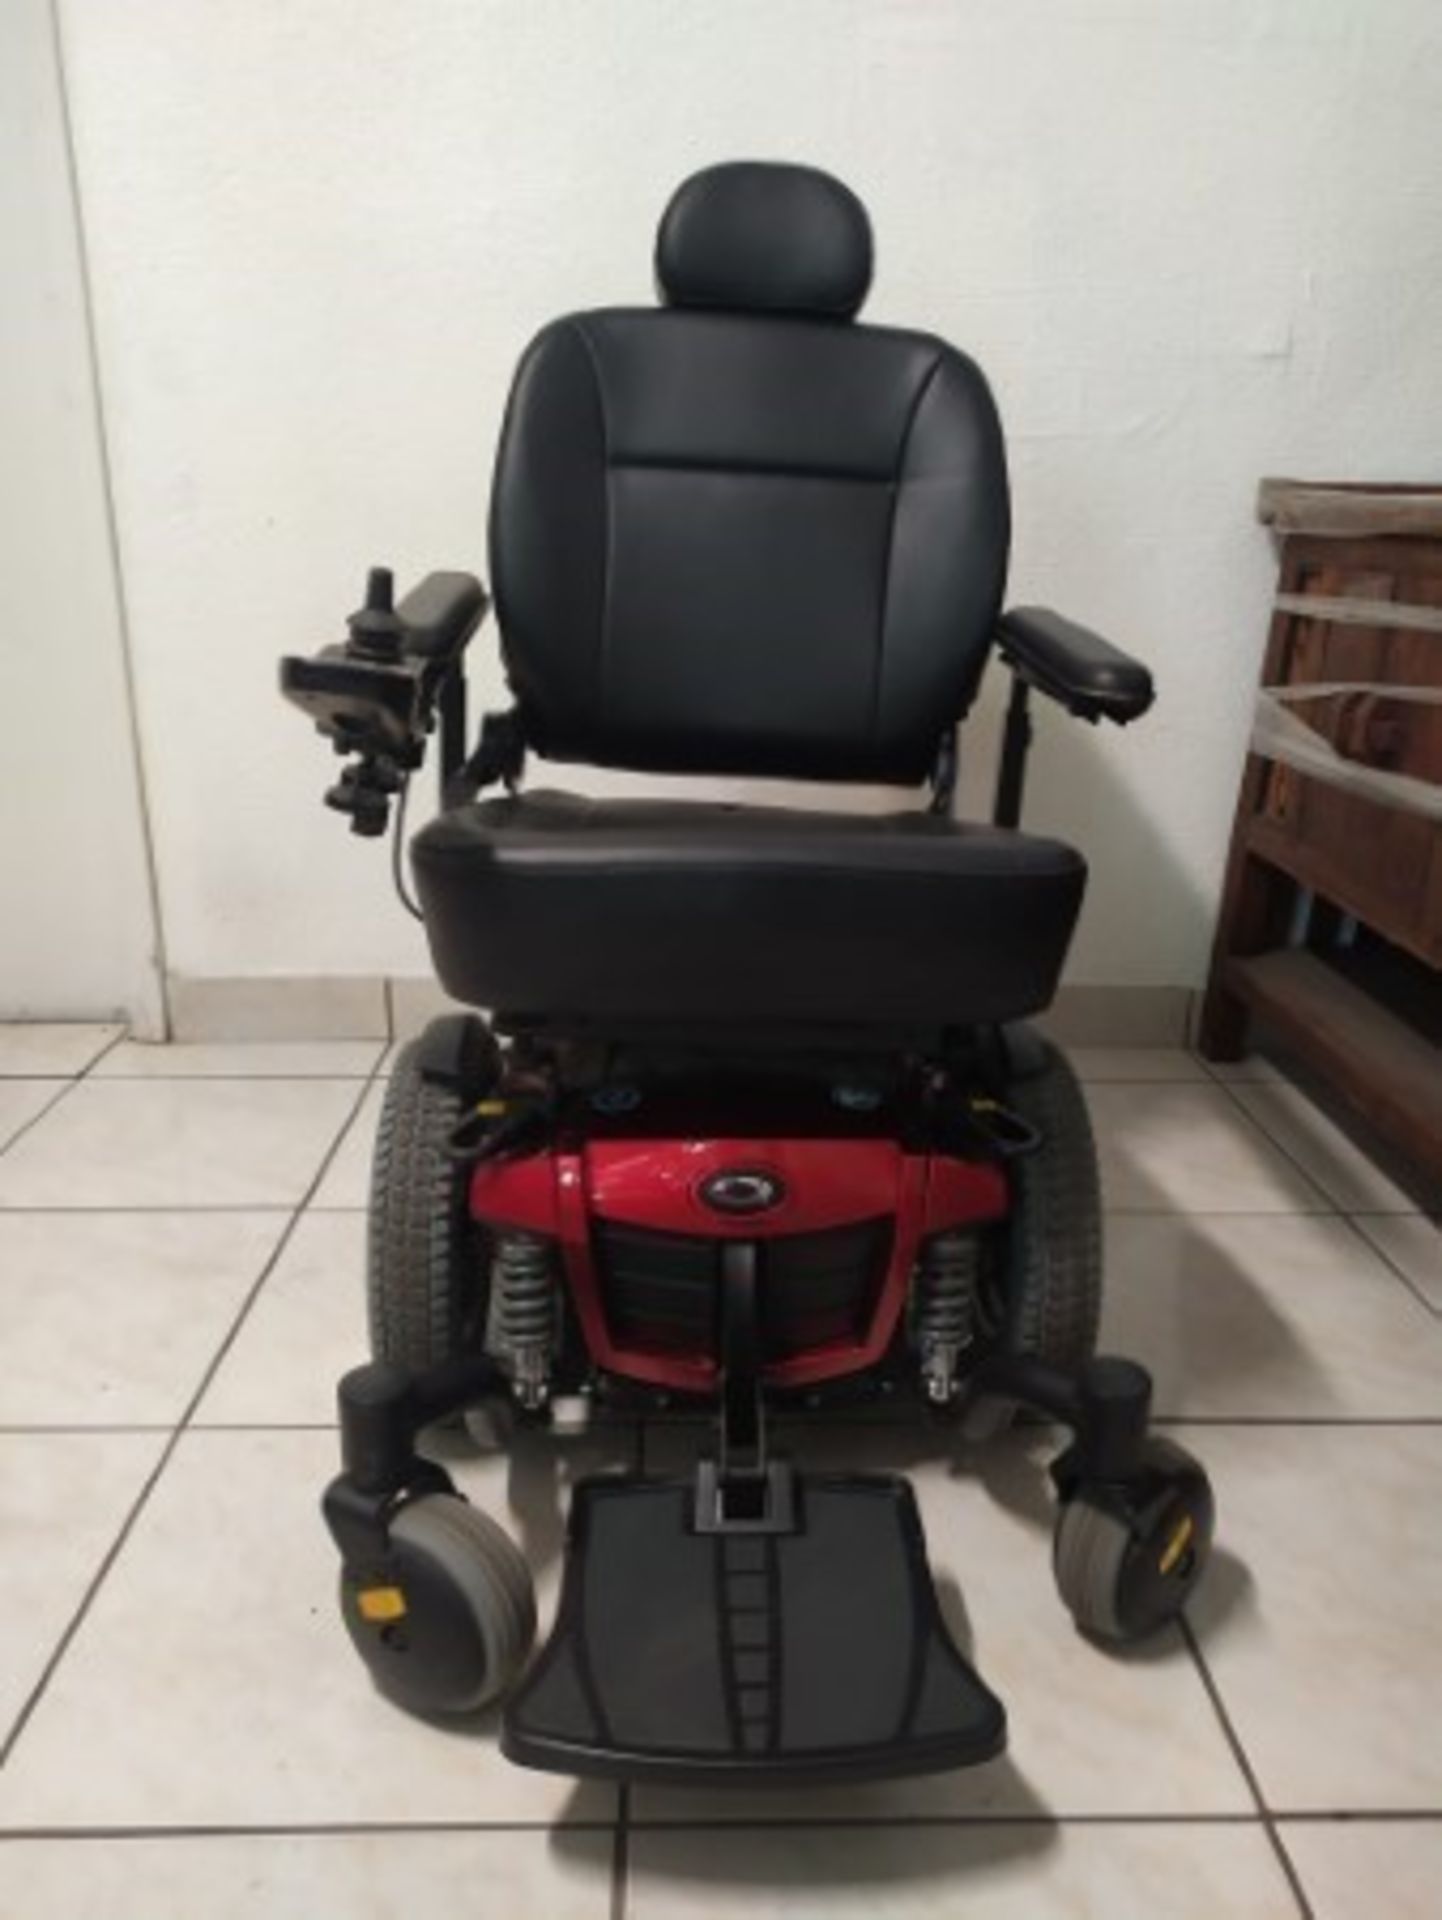 2017 QUANTUM Q6 EDGE 6-WHEEL POWER CHAIR - RED - 400LB CAPACITY - SERIAL No. JB622617126020 (CHARGER - Image 2 of 4